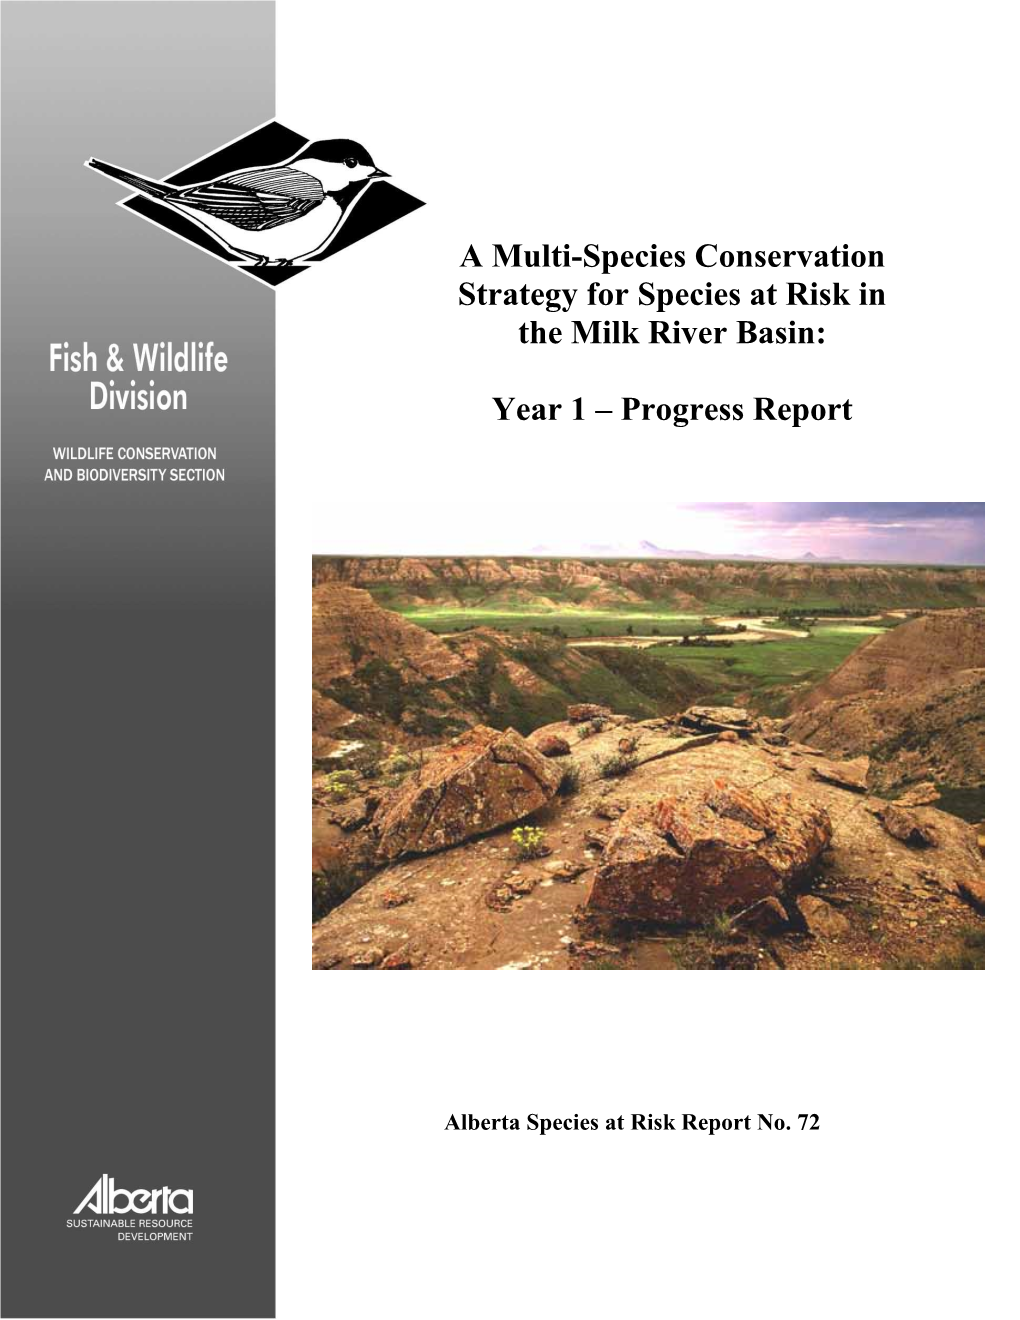 A Multi-Species Conservation Strategy for Species at Risk in the Milk River Basin